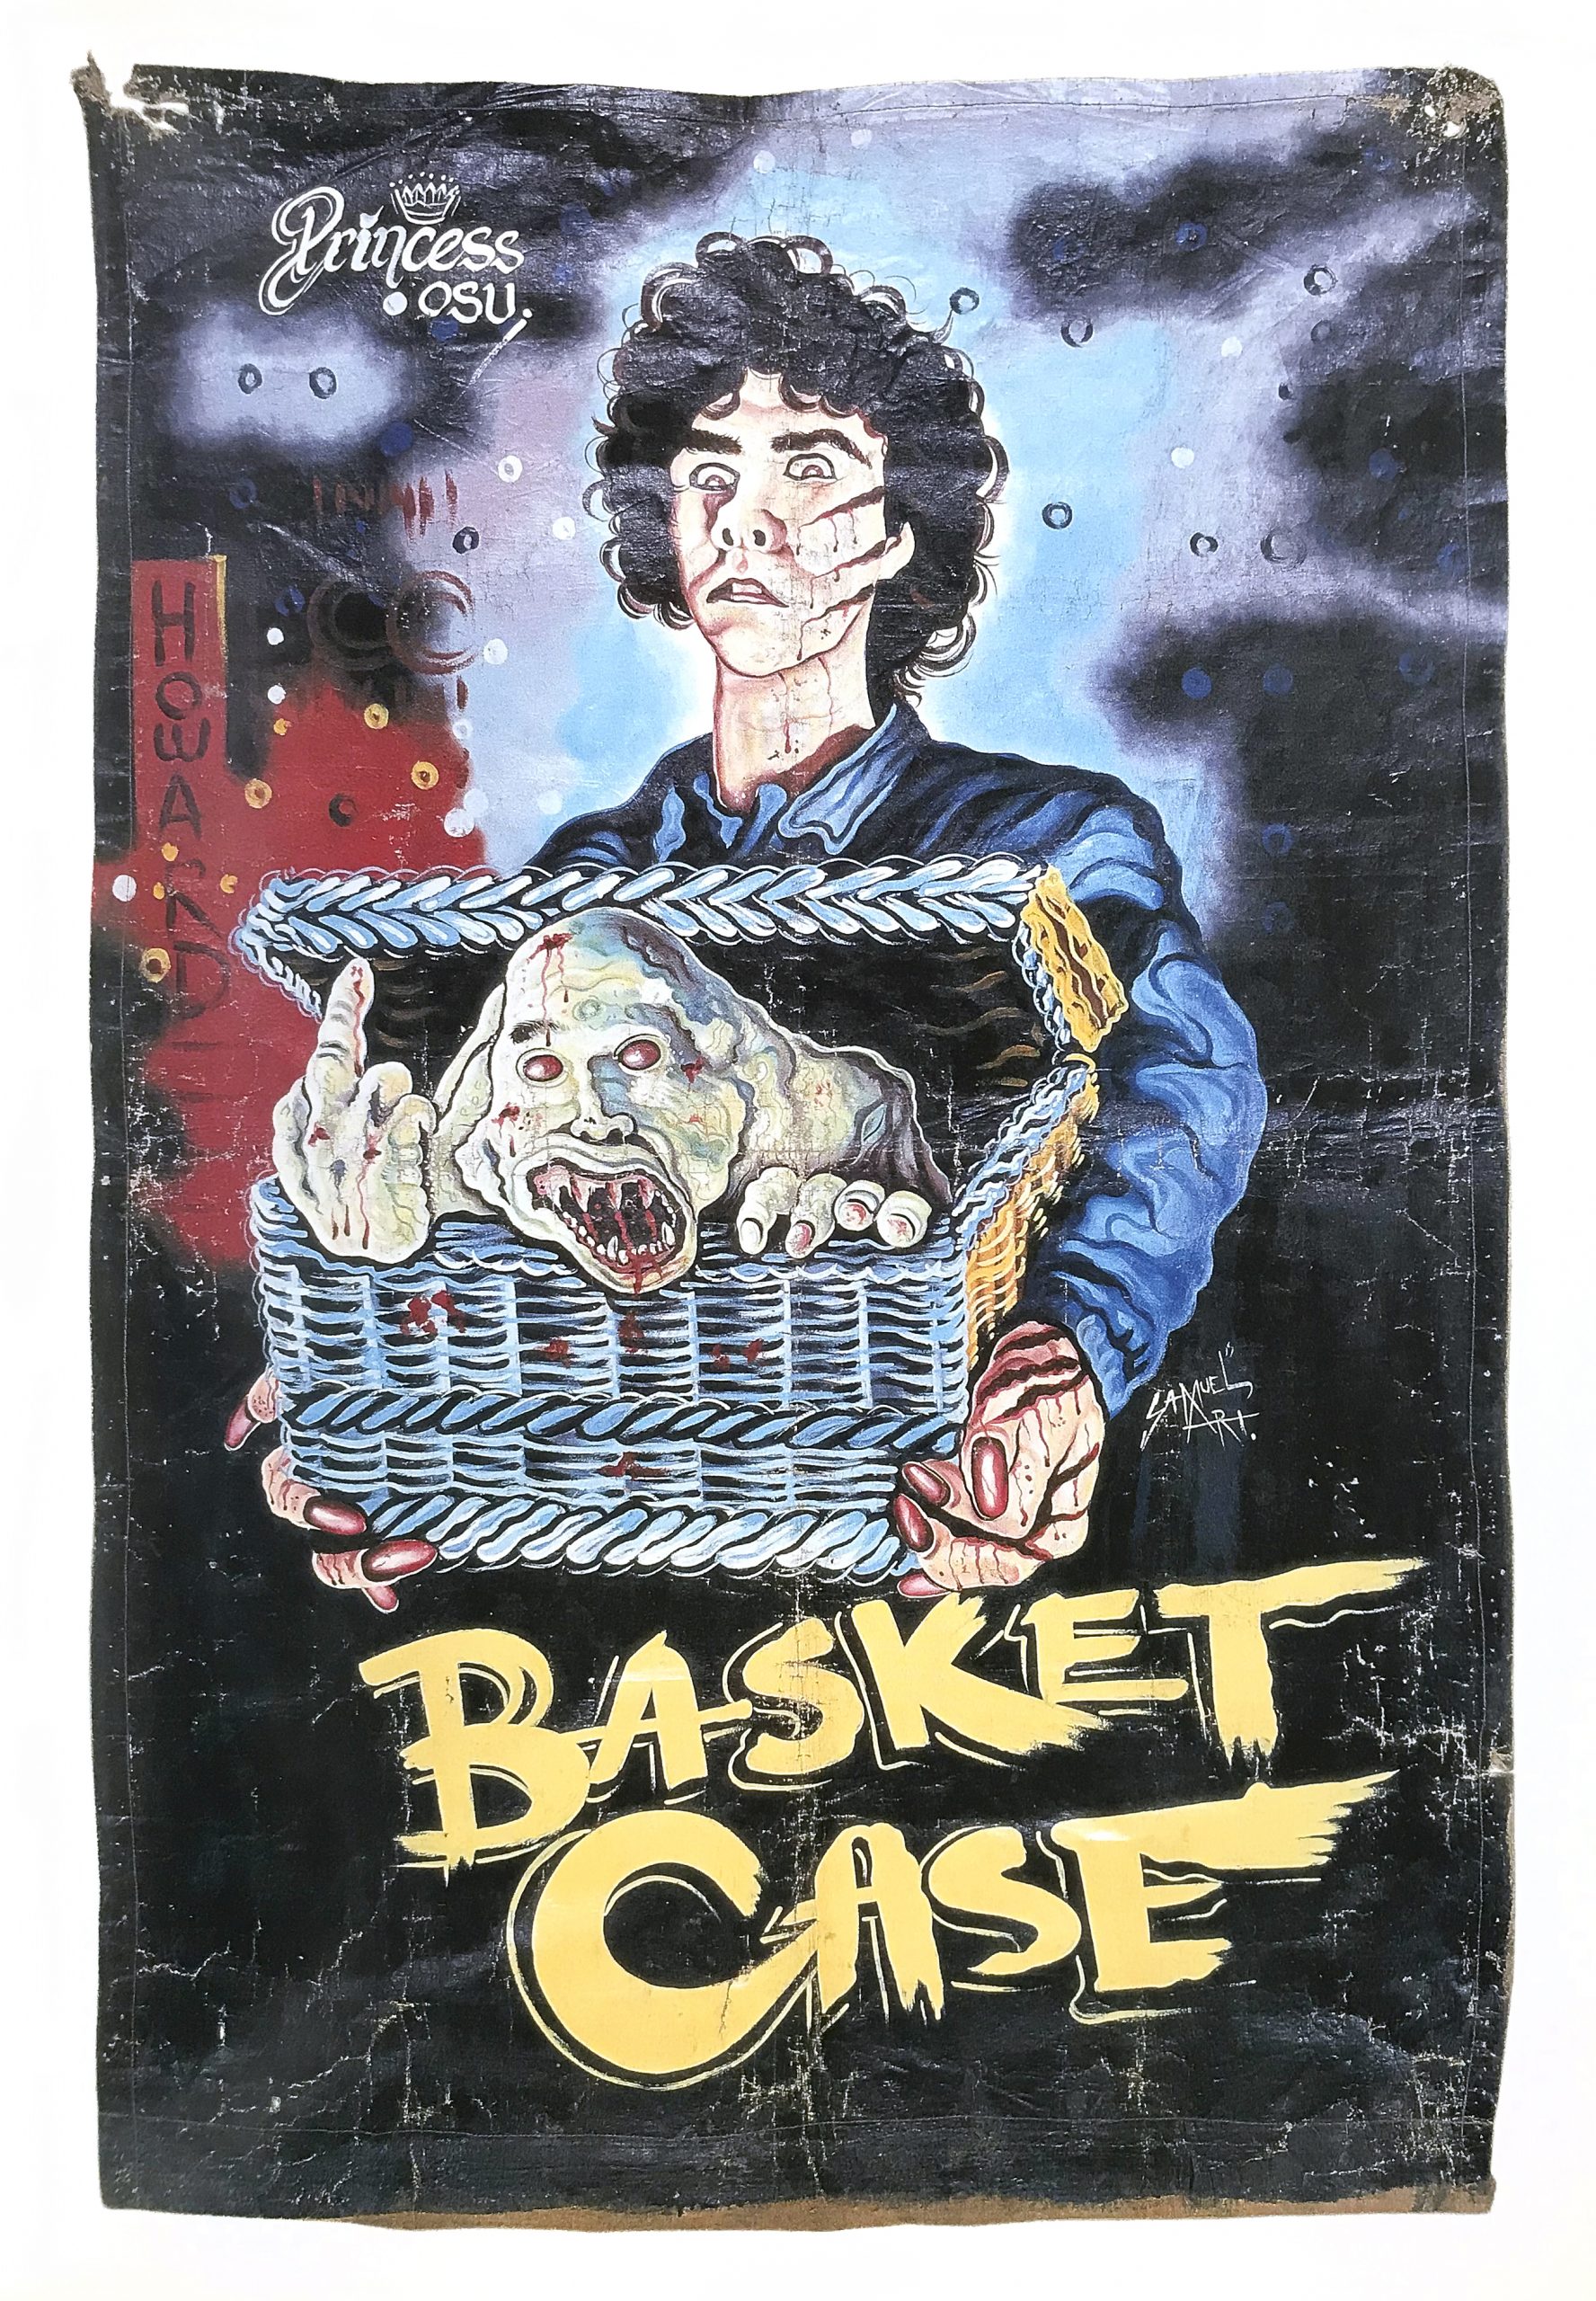 hand-painted poster of a man with short curly hair holding a chest with a creature inside